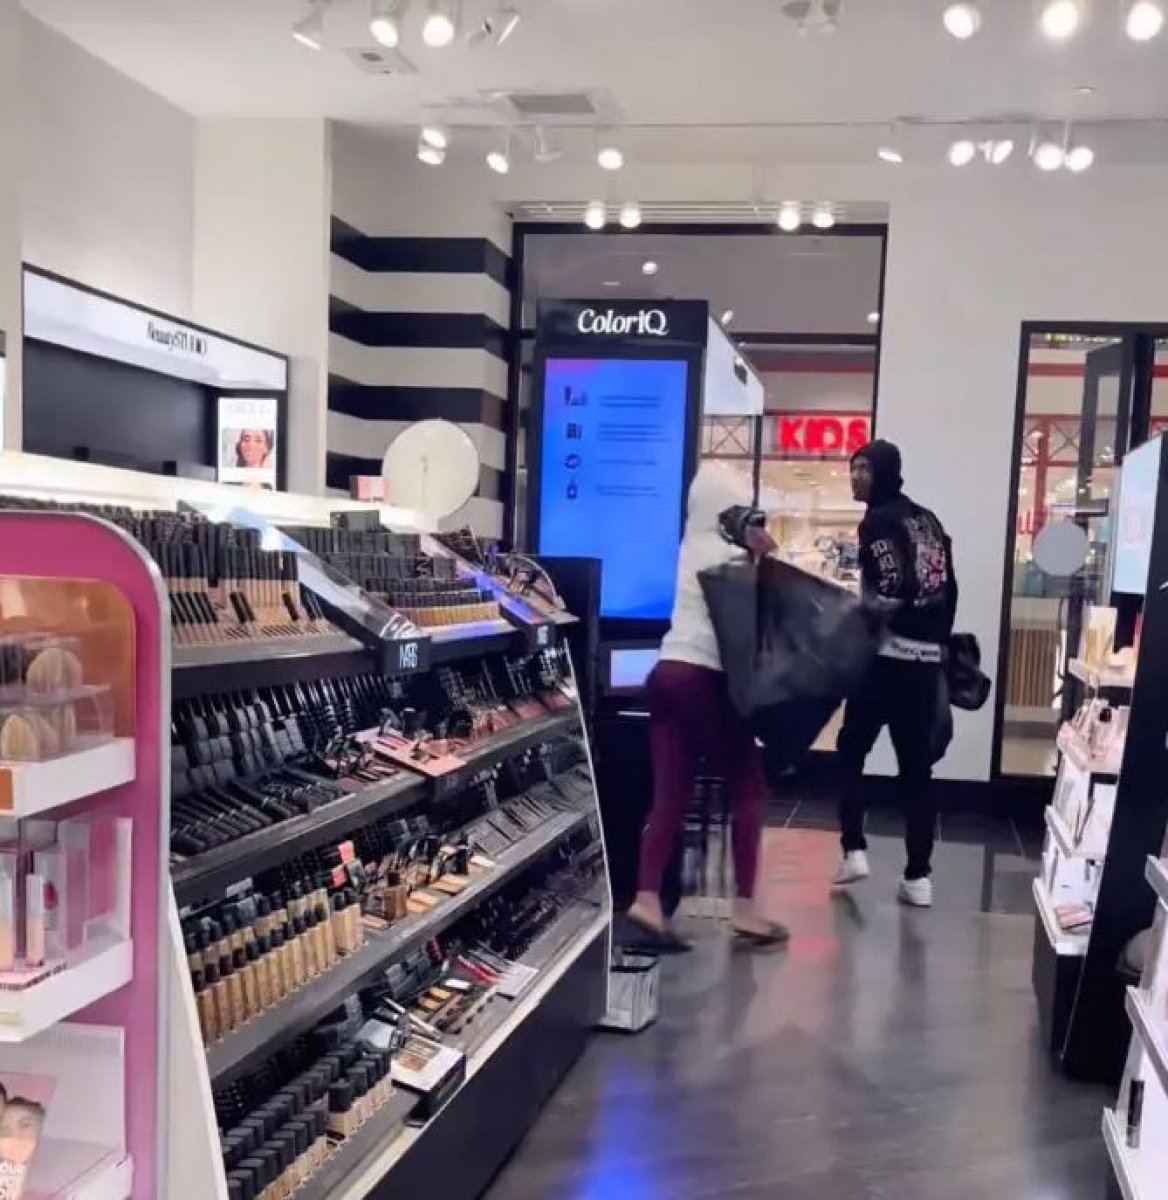 The moment the makeup store was robbed in the USA #2